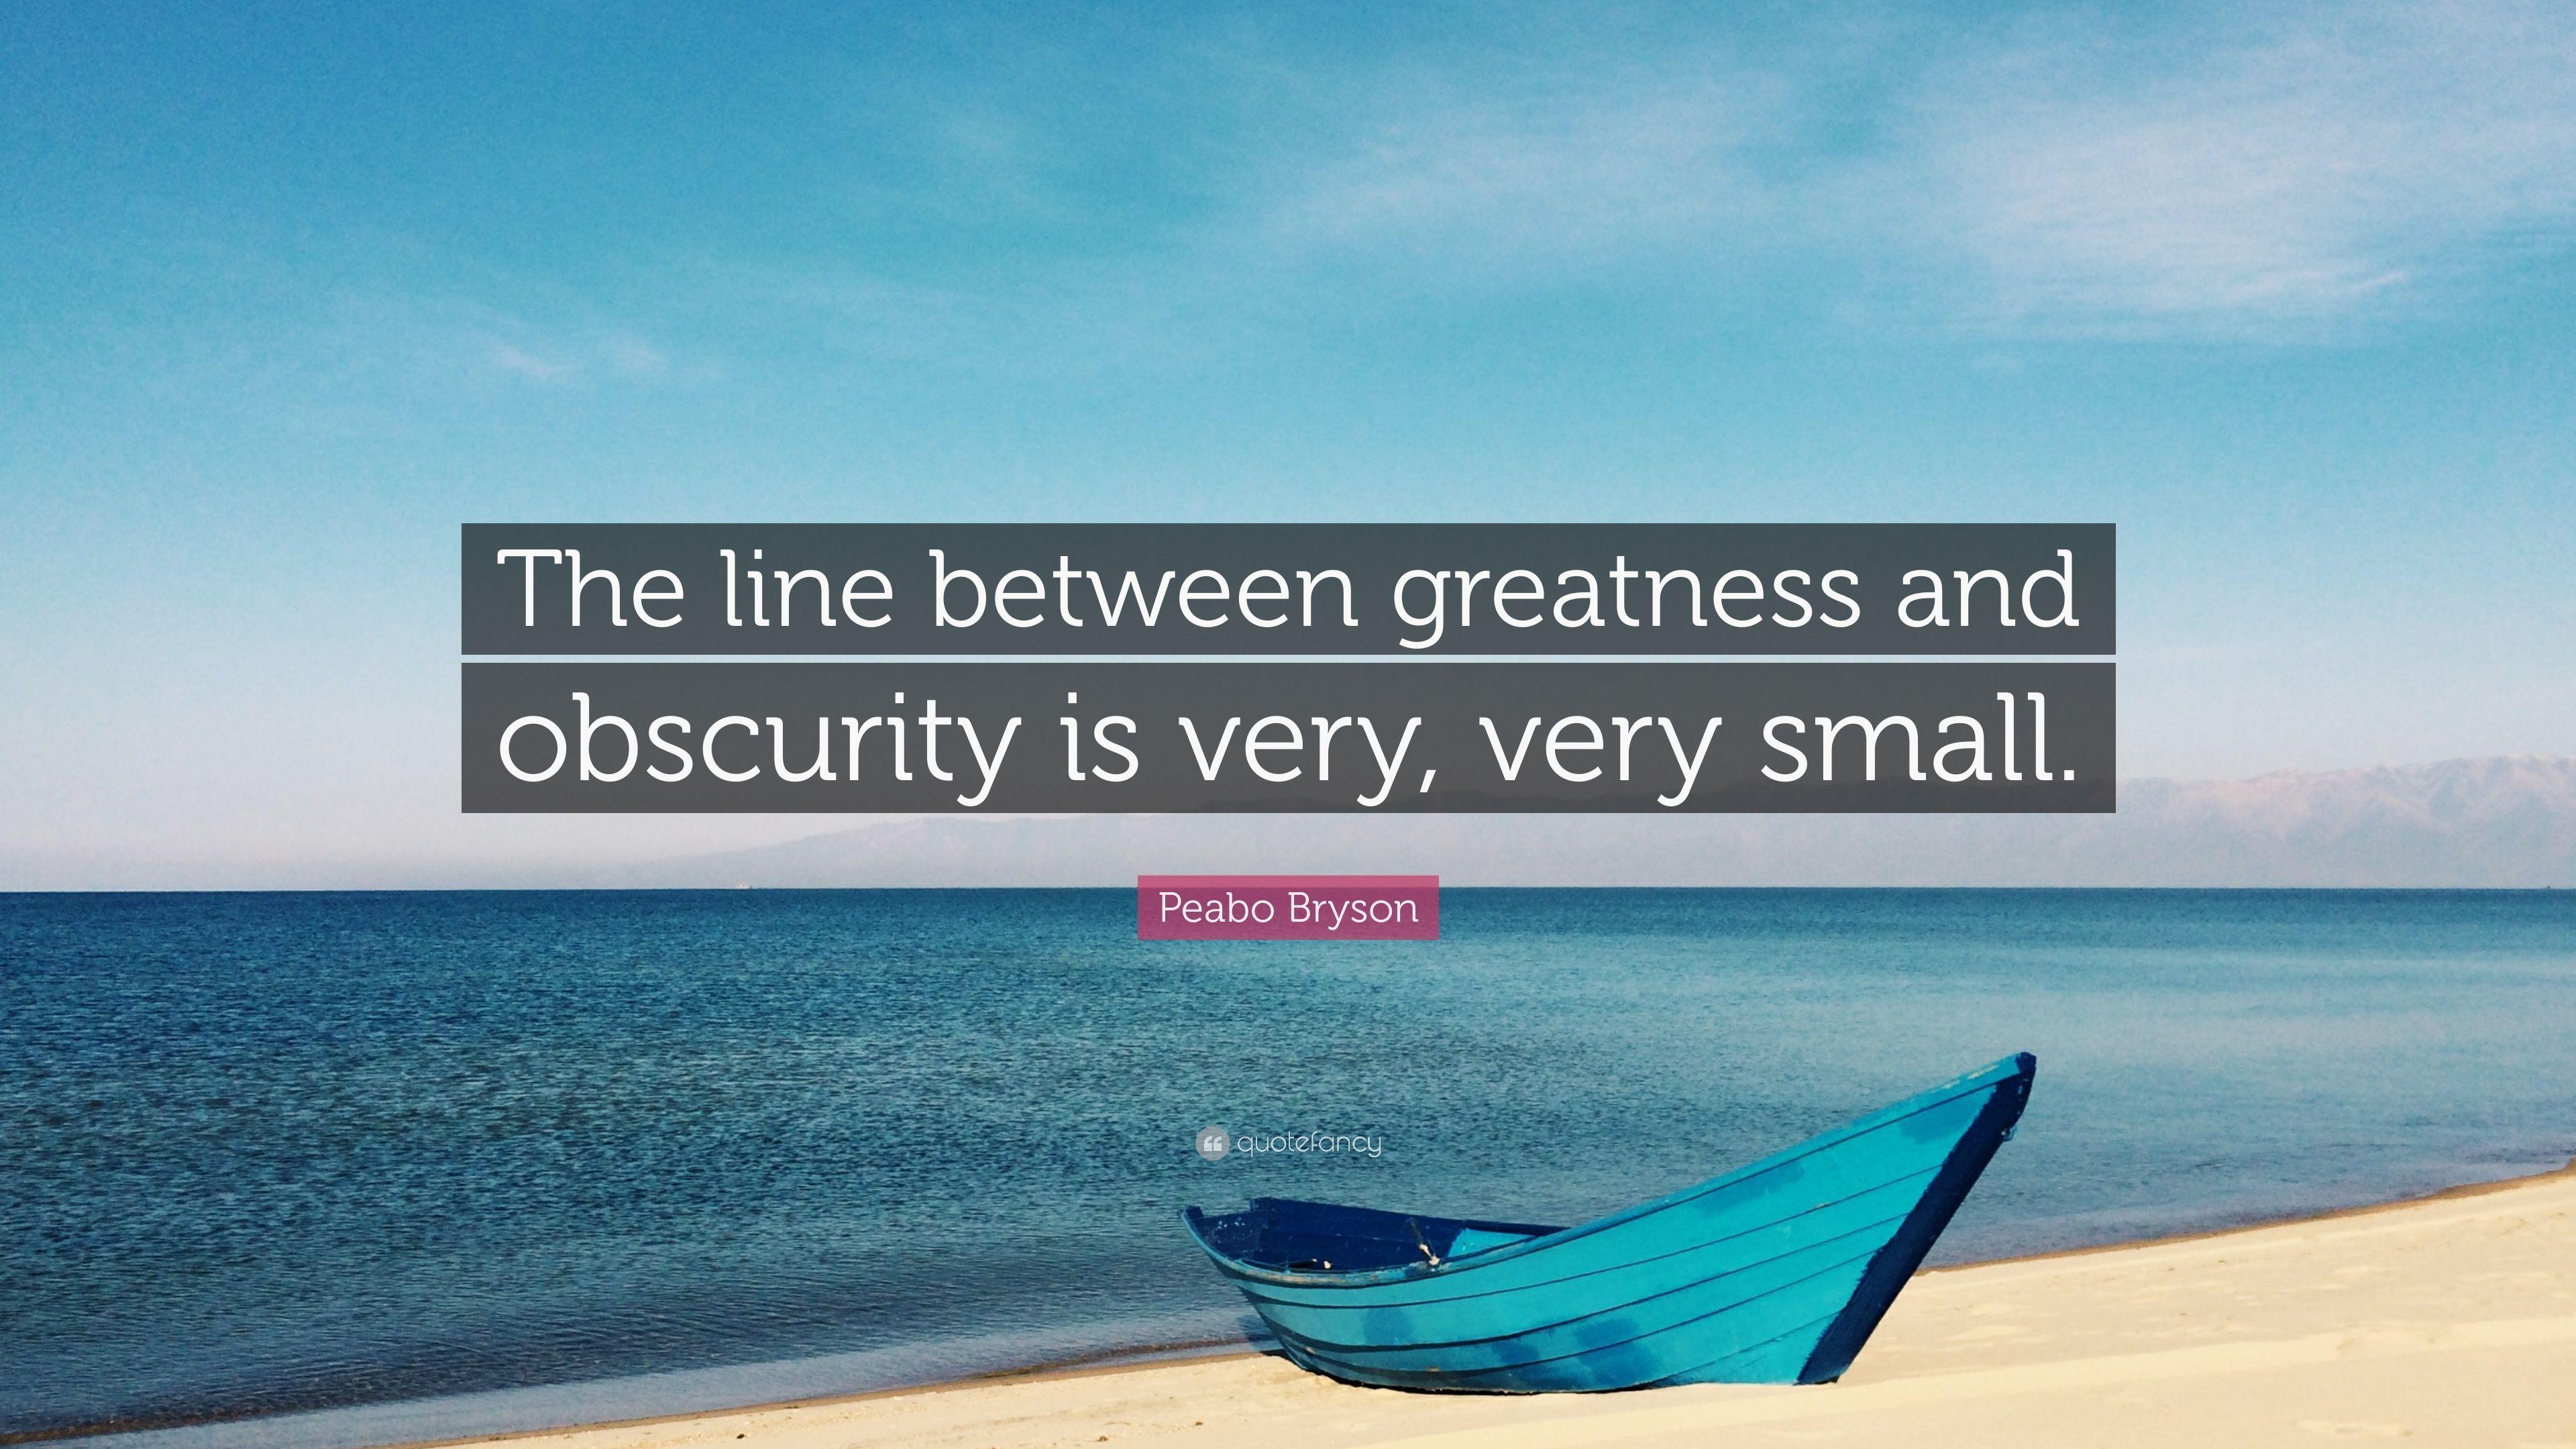 Peabo Bryson Quote: “The line between greatness and obscurity is